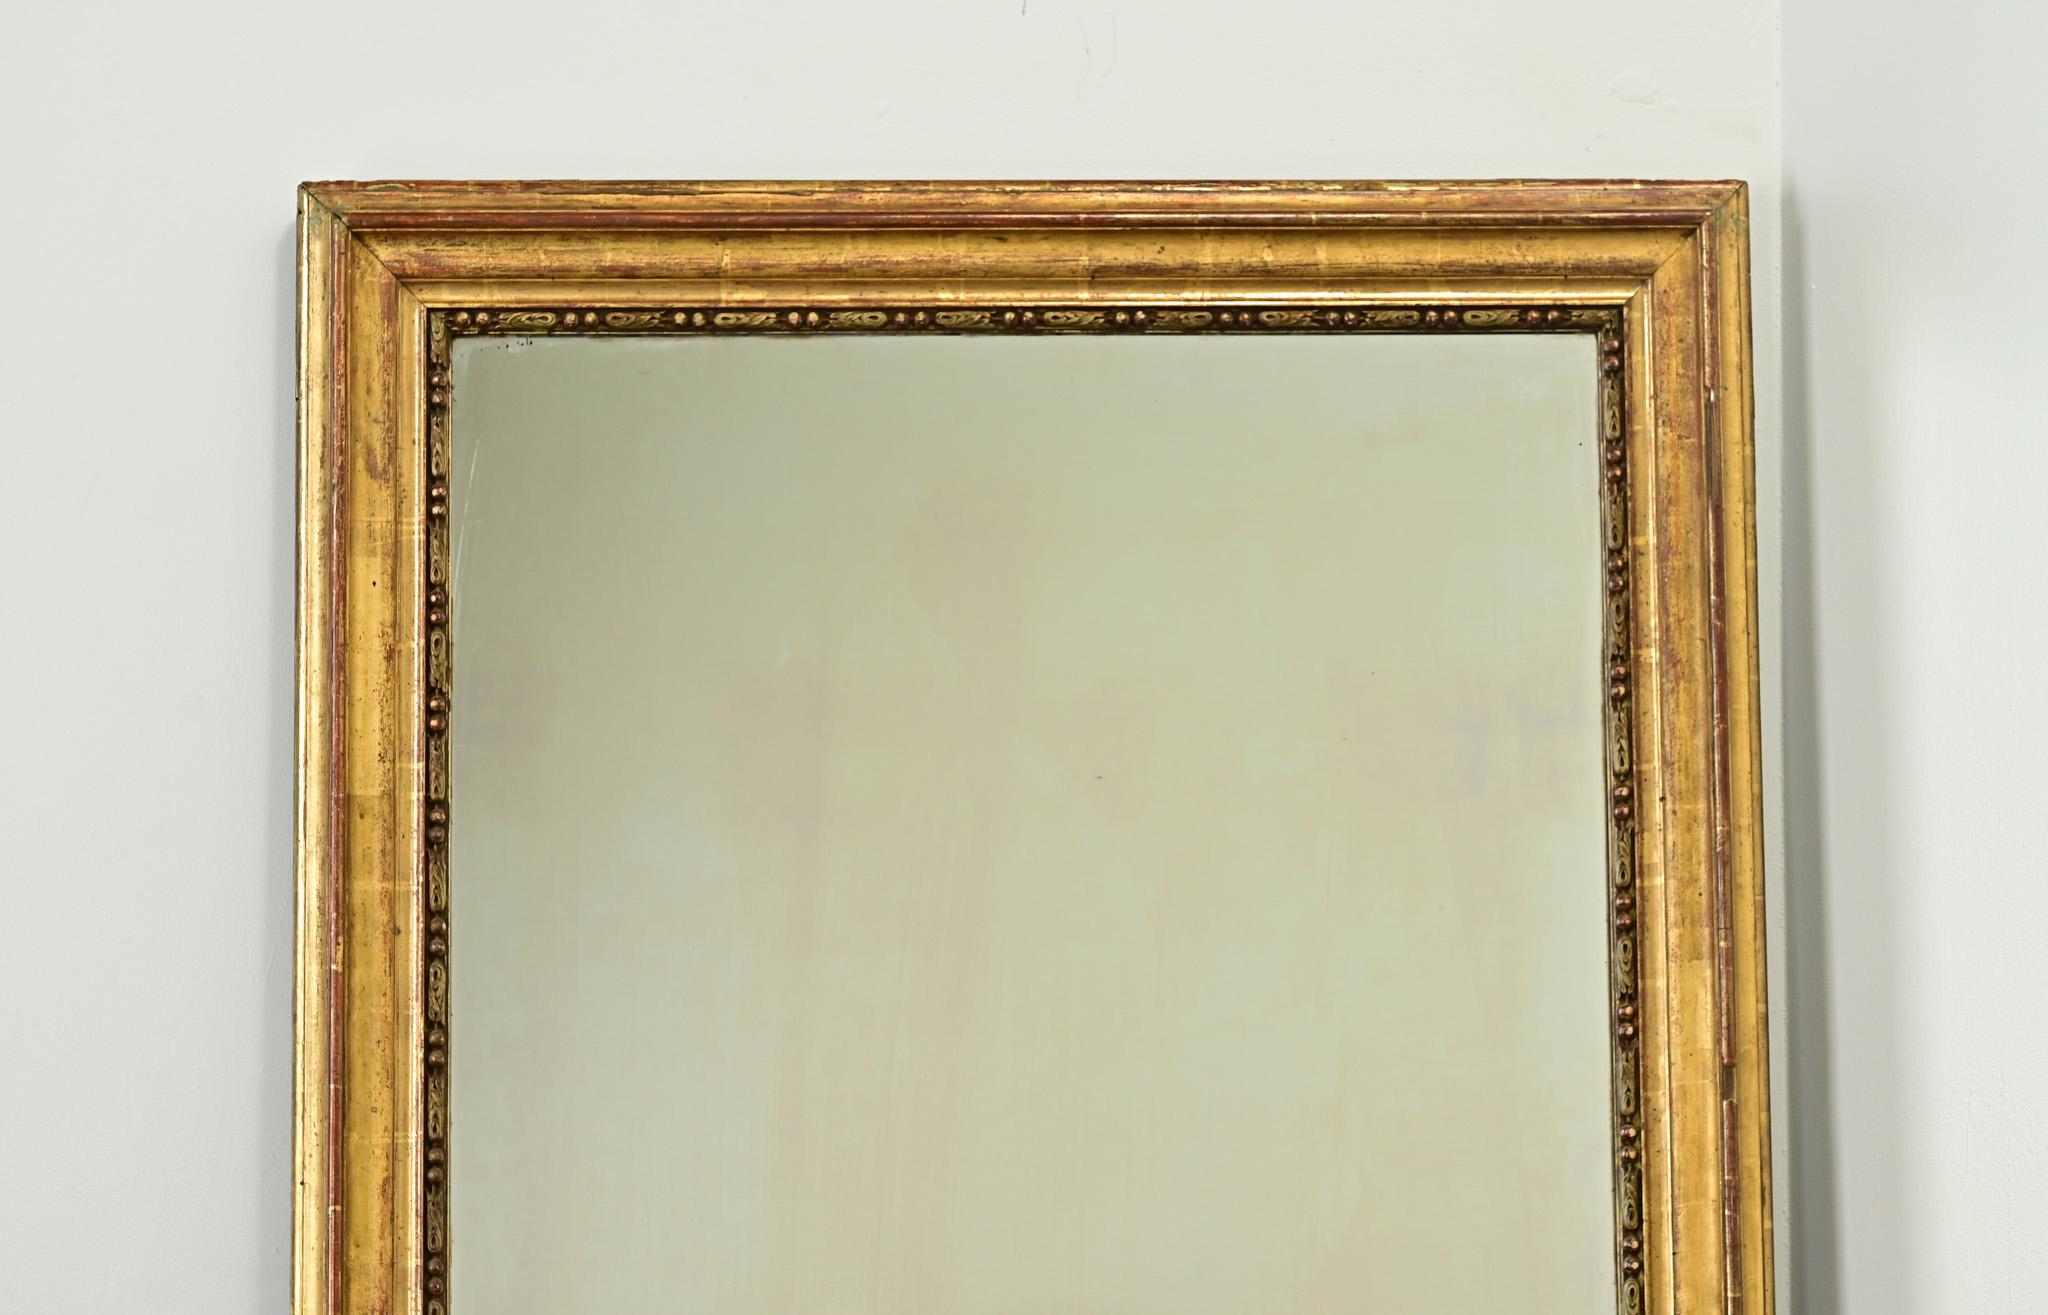 A French gold gilt mirror from the 19th Century. The simple molded frame has its original gold gilt finish revealing the reddish bole beneath. The more recent mirror plate has minimal aging. Be sure to view the detailed images of this antique